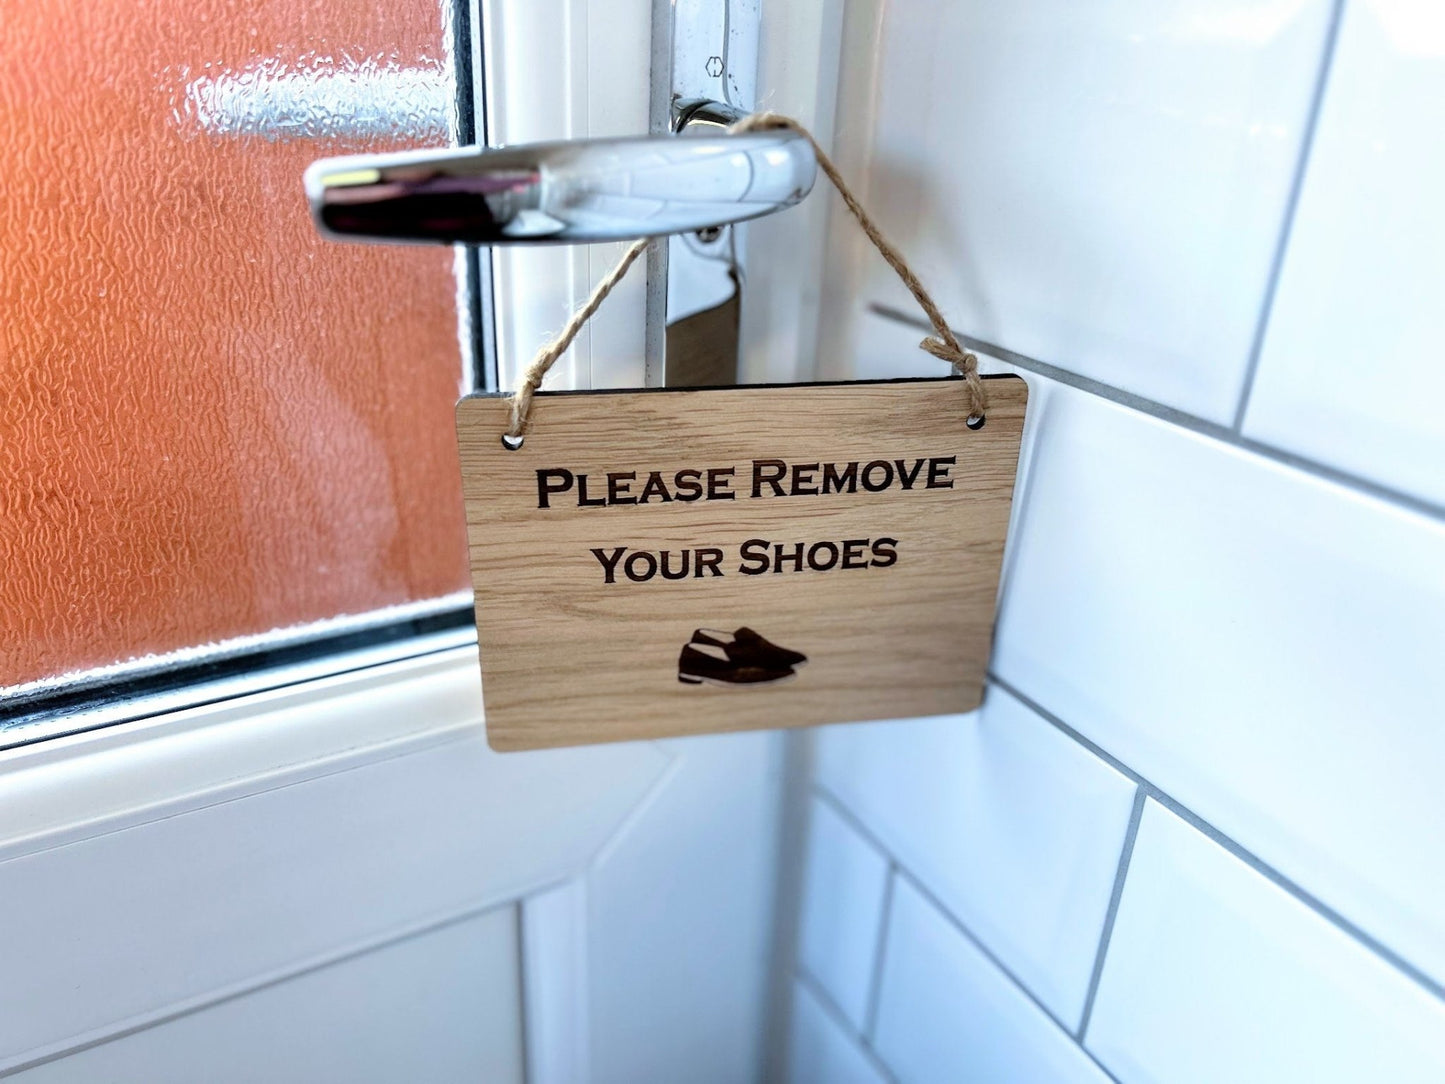 Please Remove Your Shoes | Wooden Sign | Wooden Hanging Sign | Gardeners Sign | Utility Room Sign | Guest Sign - CherryGroveCraft